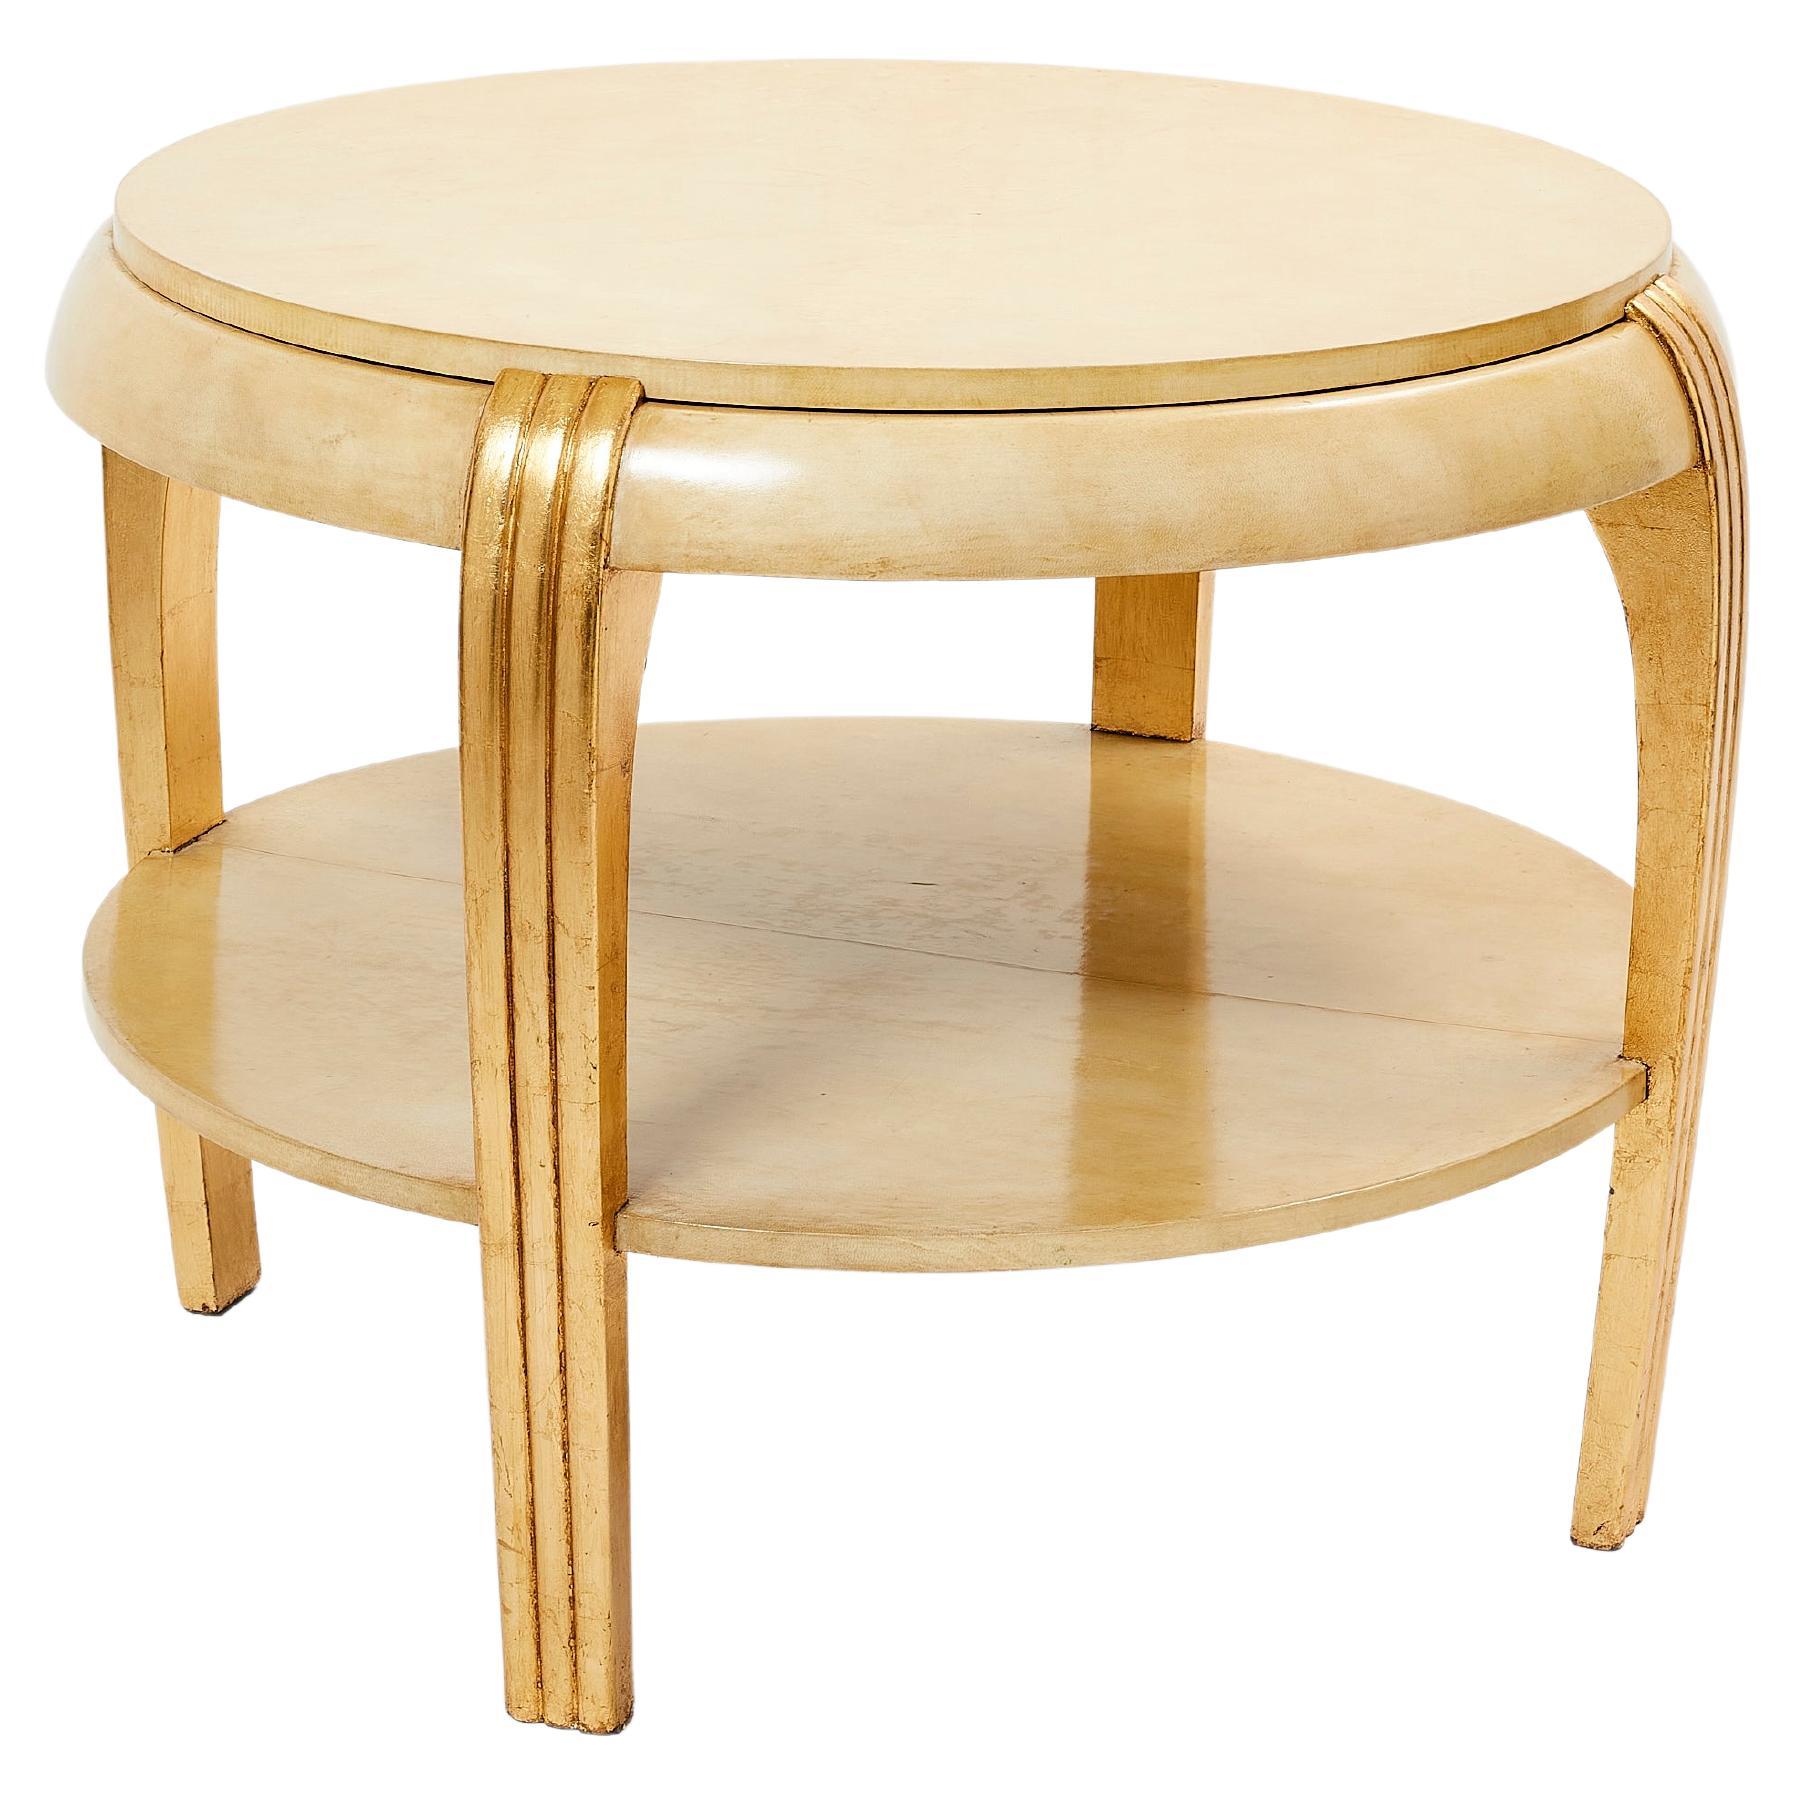 Attr. Maurice Dufrène Gilded Wood and Parchment gueridon table 1930s